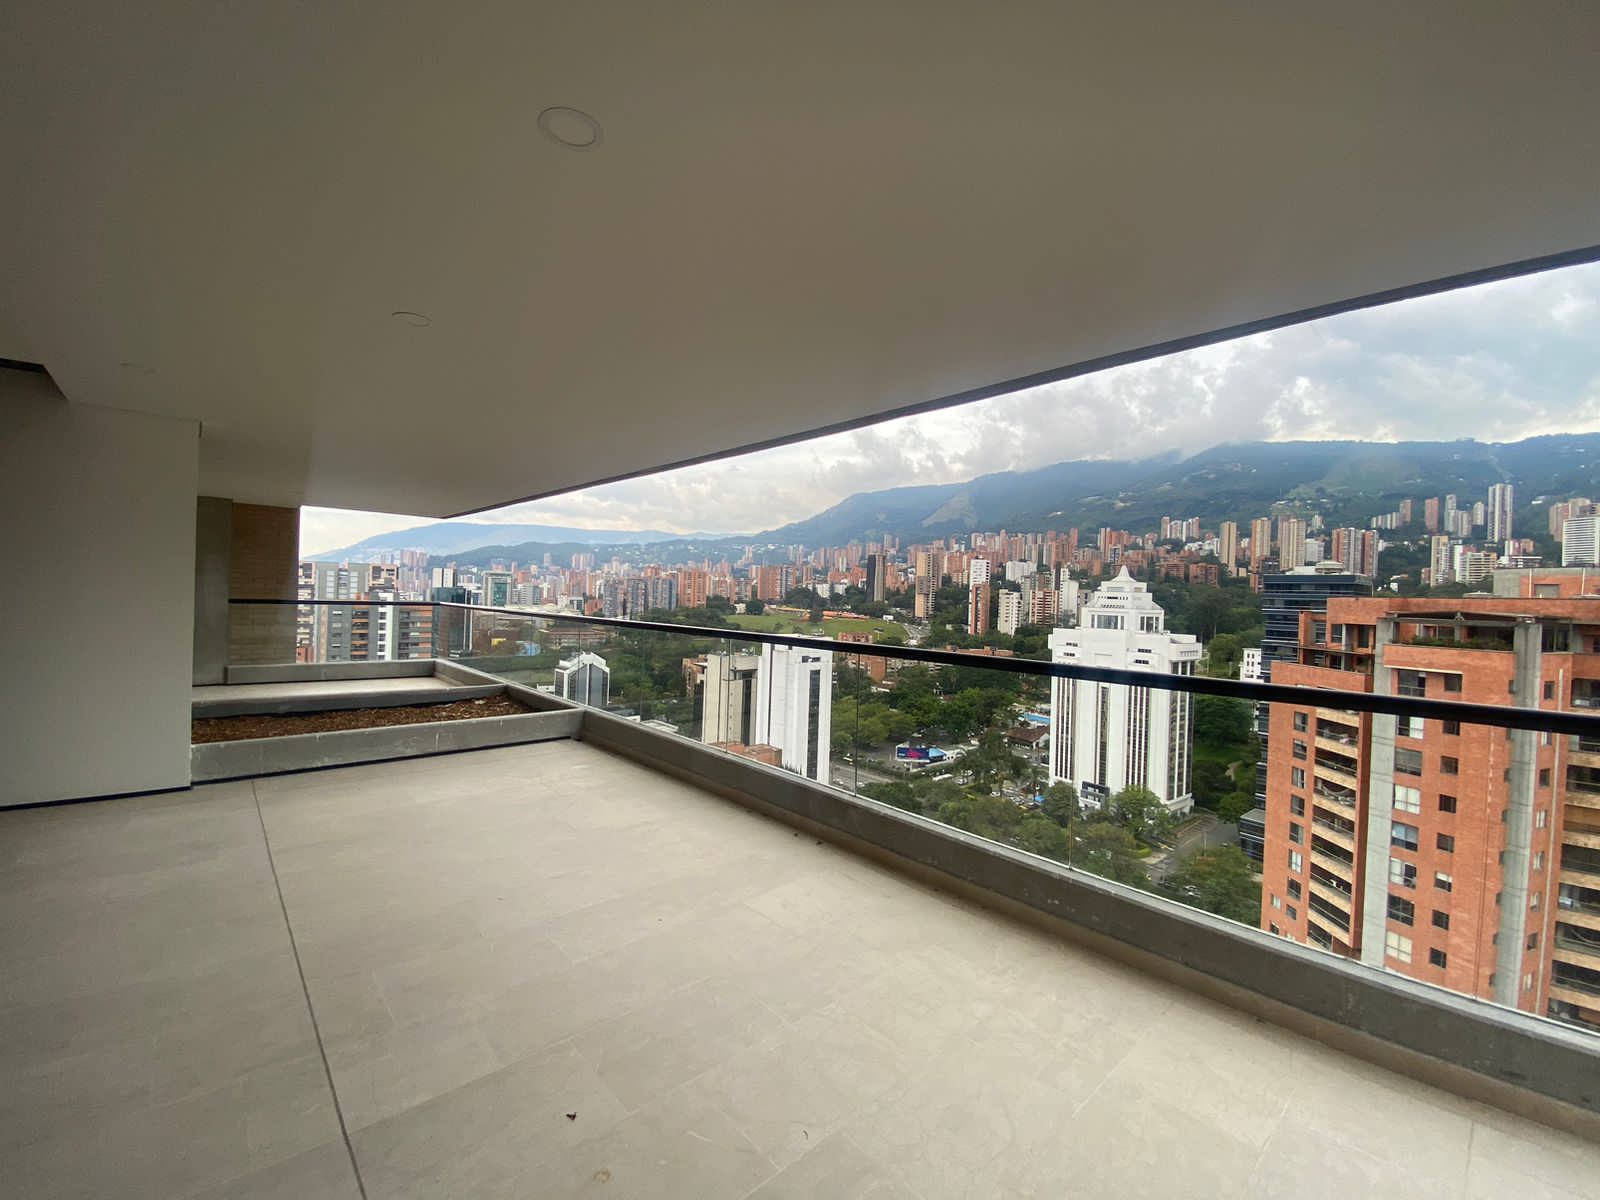 Incredible Brand New Two-Floor El Poblado Penthouse With 1,200 Square Foot Private Rooftop Terrace